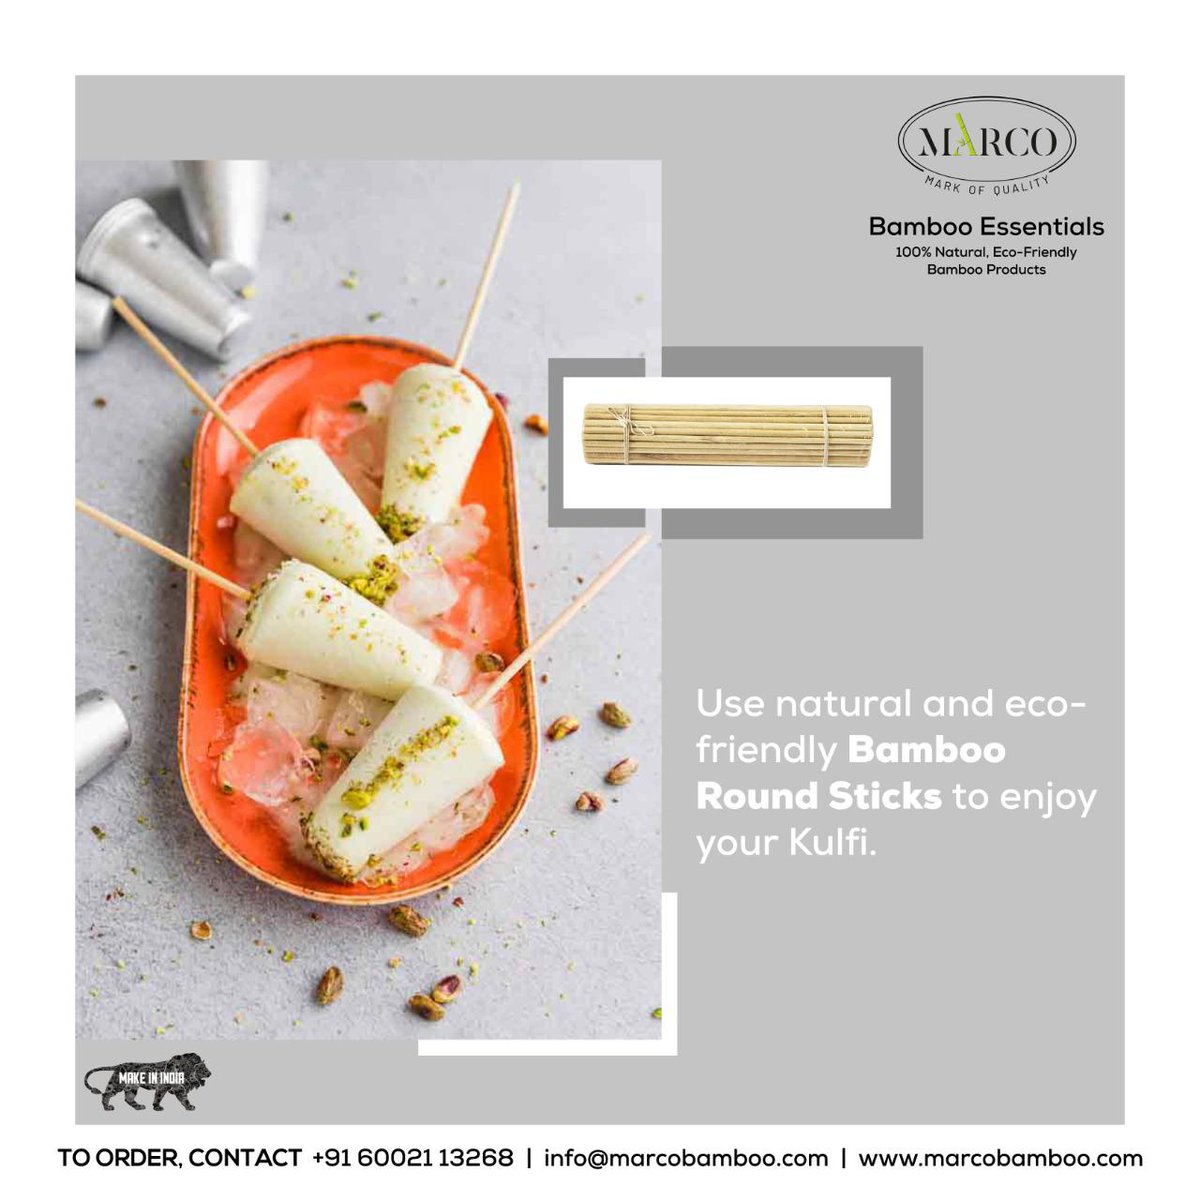 Making kulfi at home is easy an affordable now. Use natural - eco-friendly bamboo sticks.
Contact for more details.
.
.
.
#Kulfi #KulfiStick #Stick #Sticks #BambooSticks #BambooRoundSticks #RoundSticks #RoundStick #EcoFriendlySticks #MarcoBambooEssentials #Guwahati #Assam